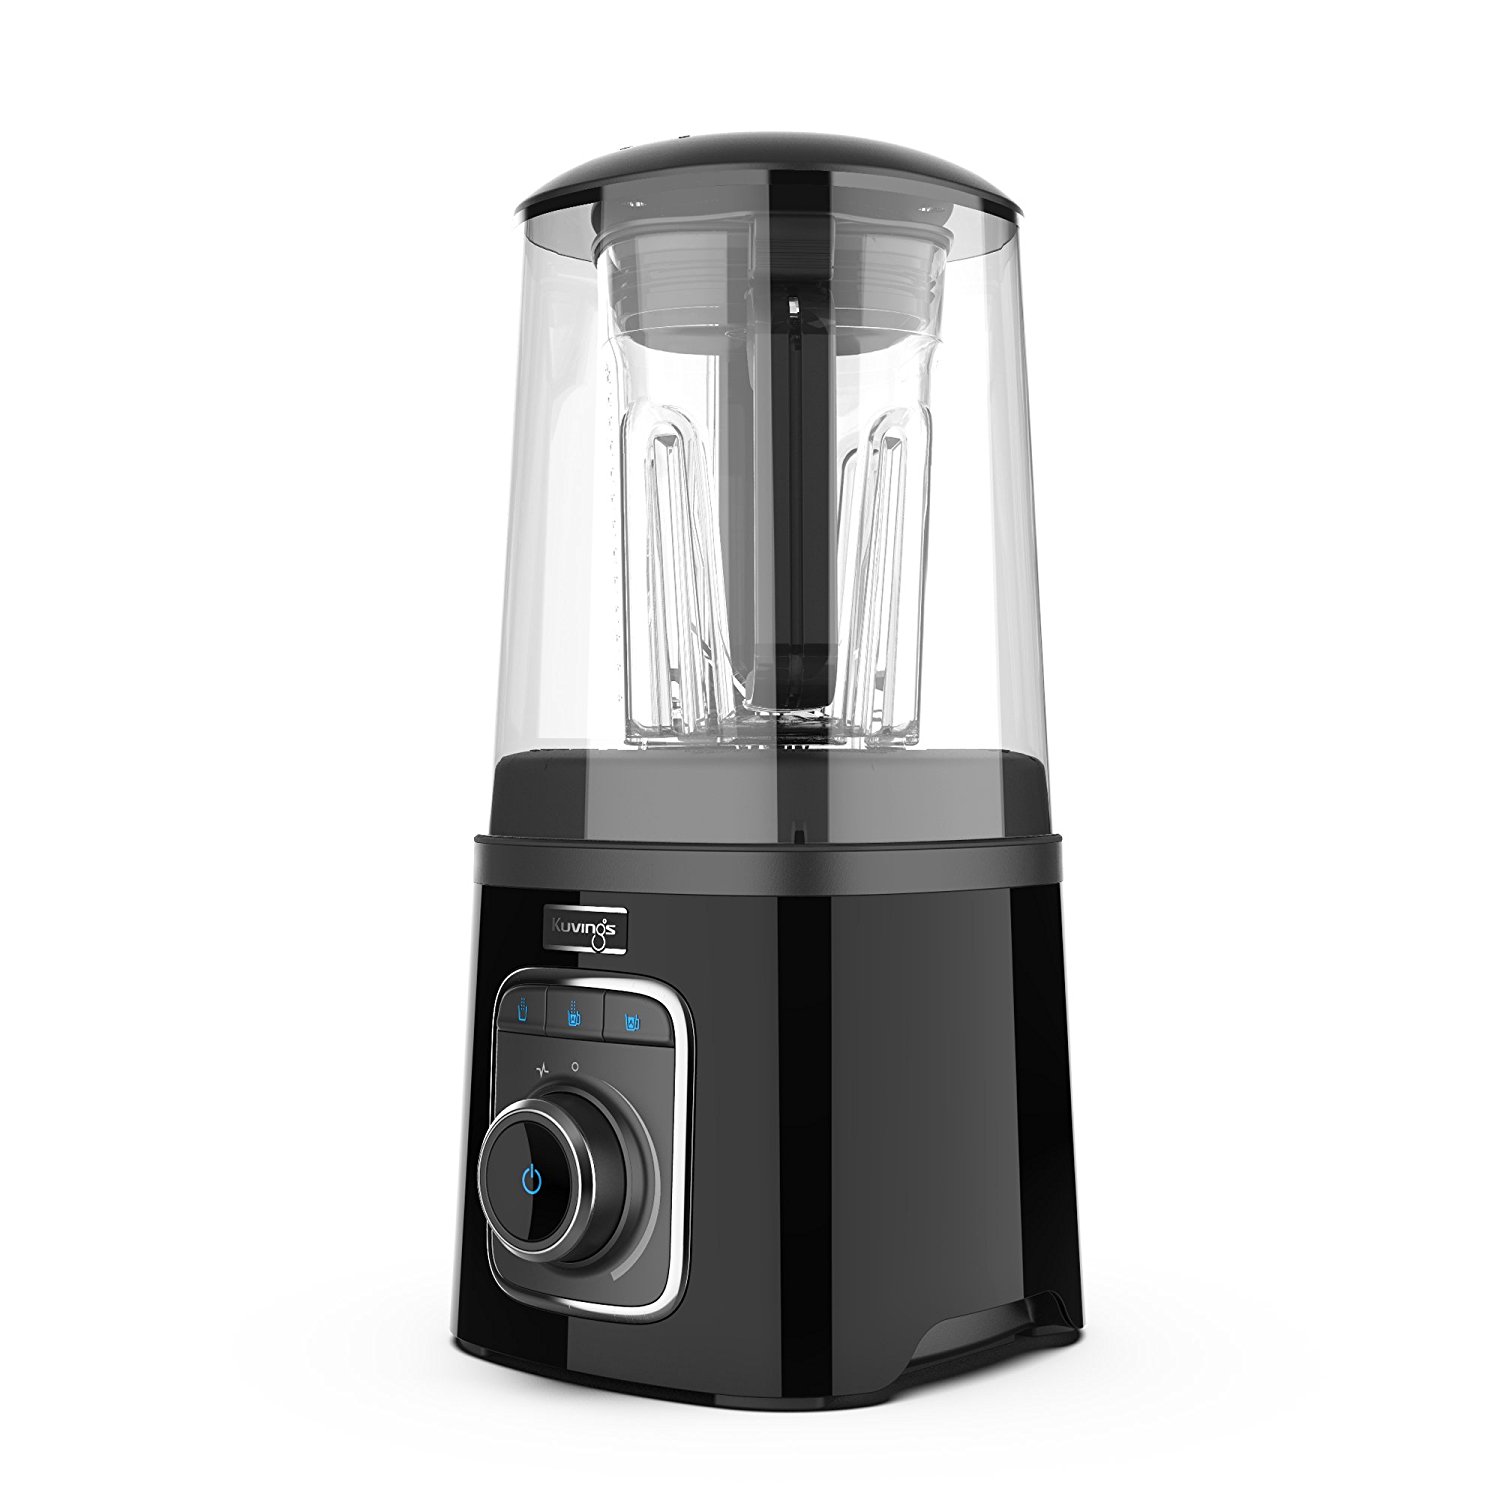 Kuvings Vacuum Sealed Auto Blender SV500B with BPA-Free Components, Quiet Blender, Virtually No Foam, Heavy Duty 3.5 HP Motor, 7 Year Warranty, Black